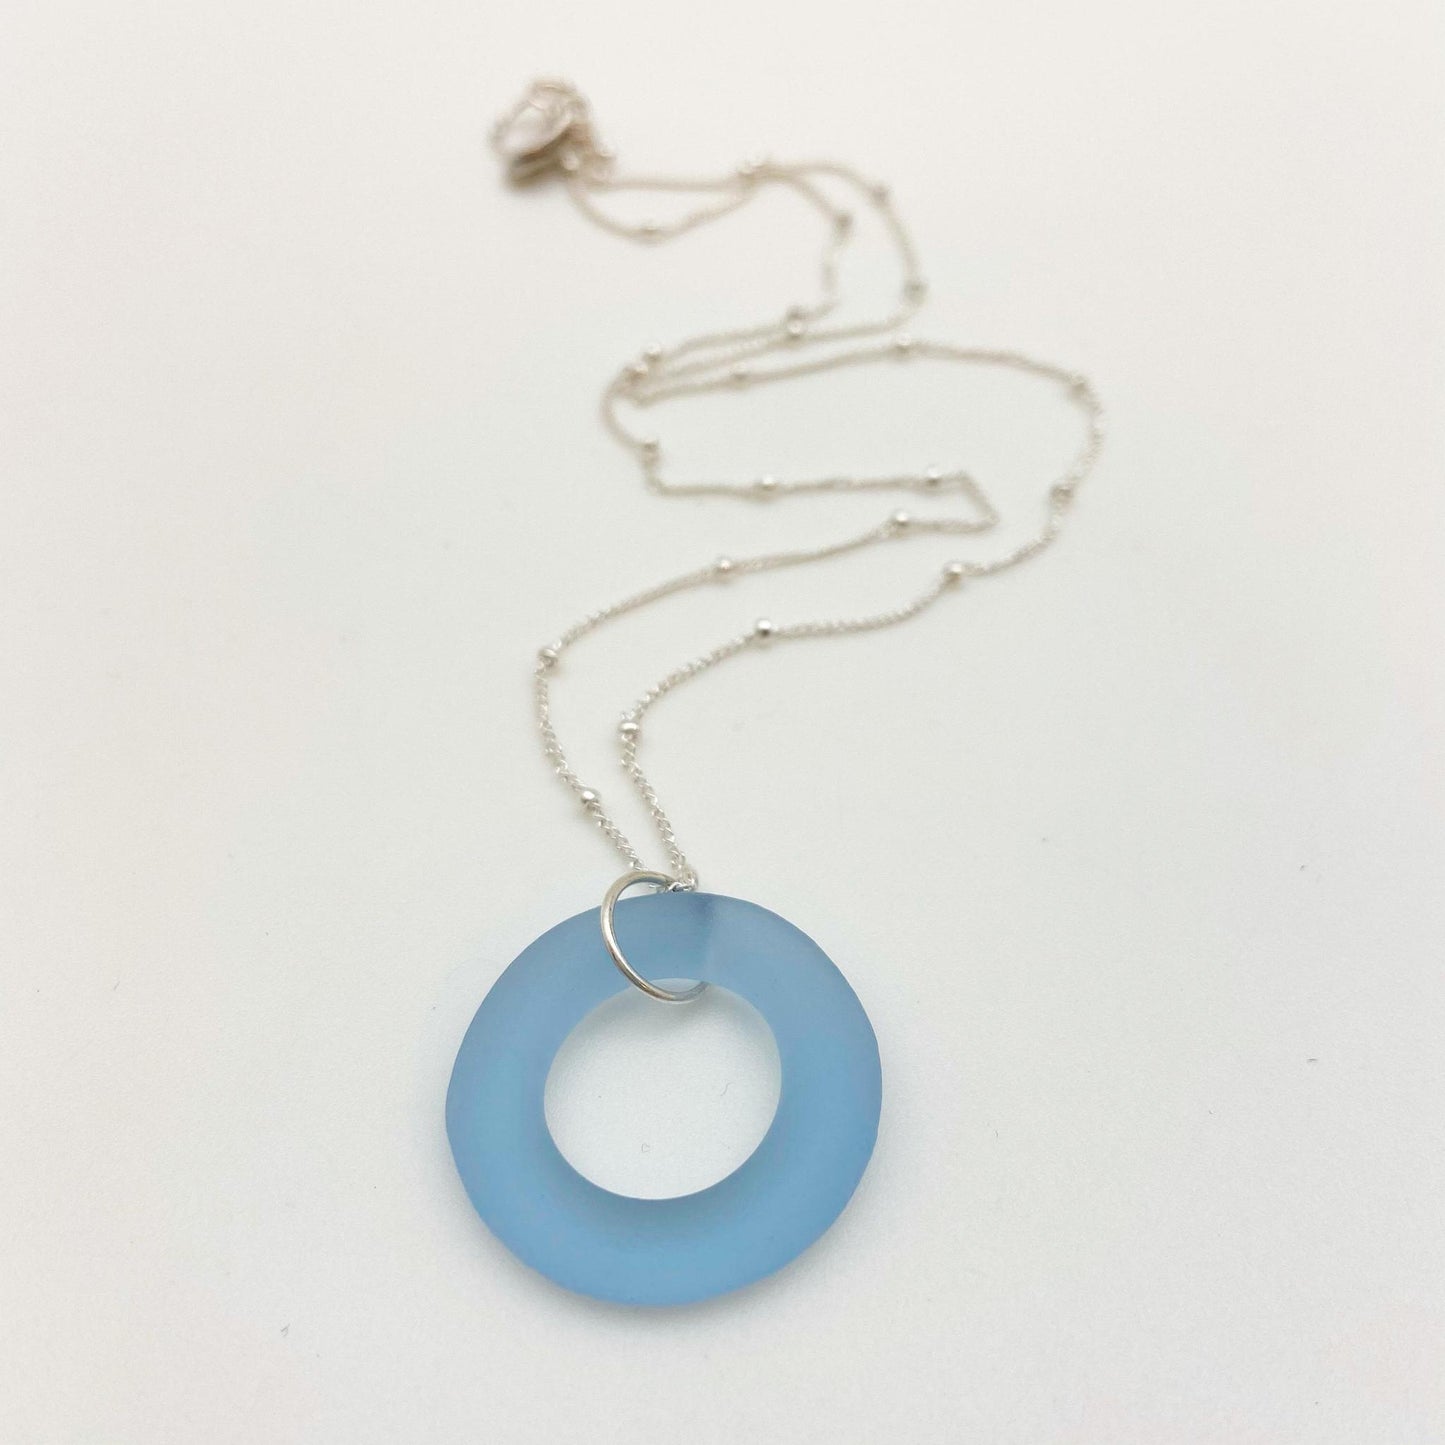 Necklace - Reclaimed Glass Circle - Sterling Silver Chain